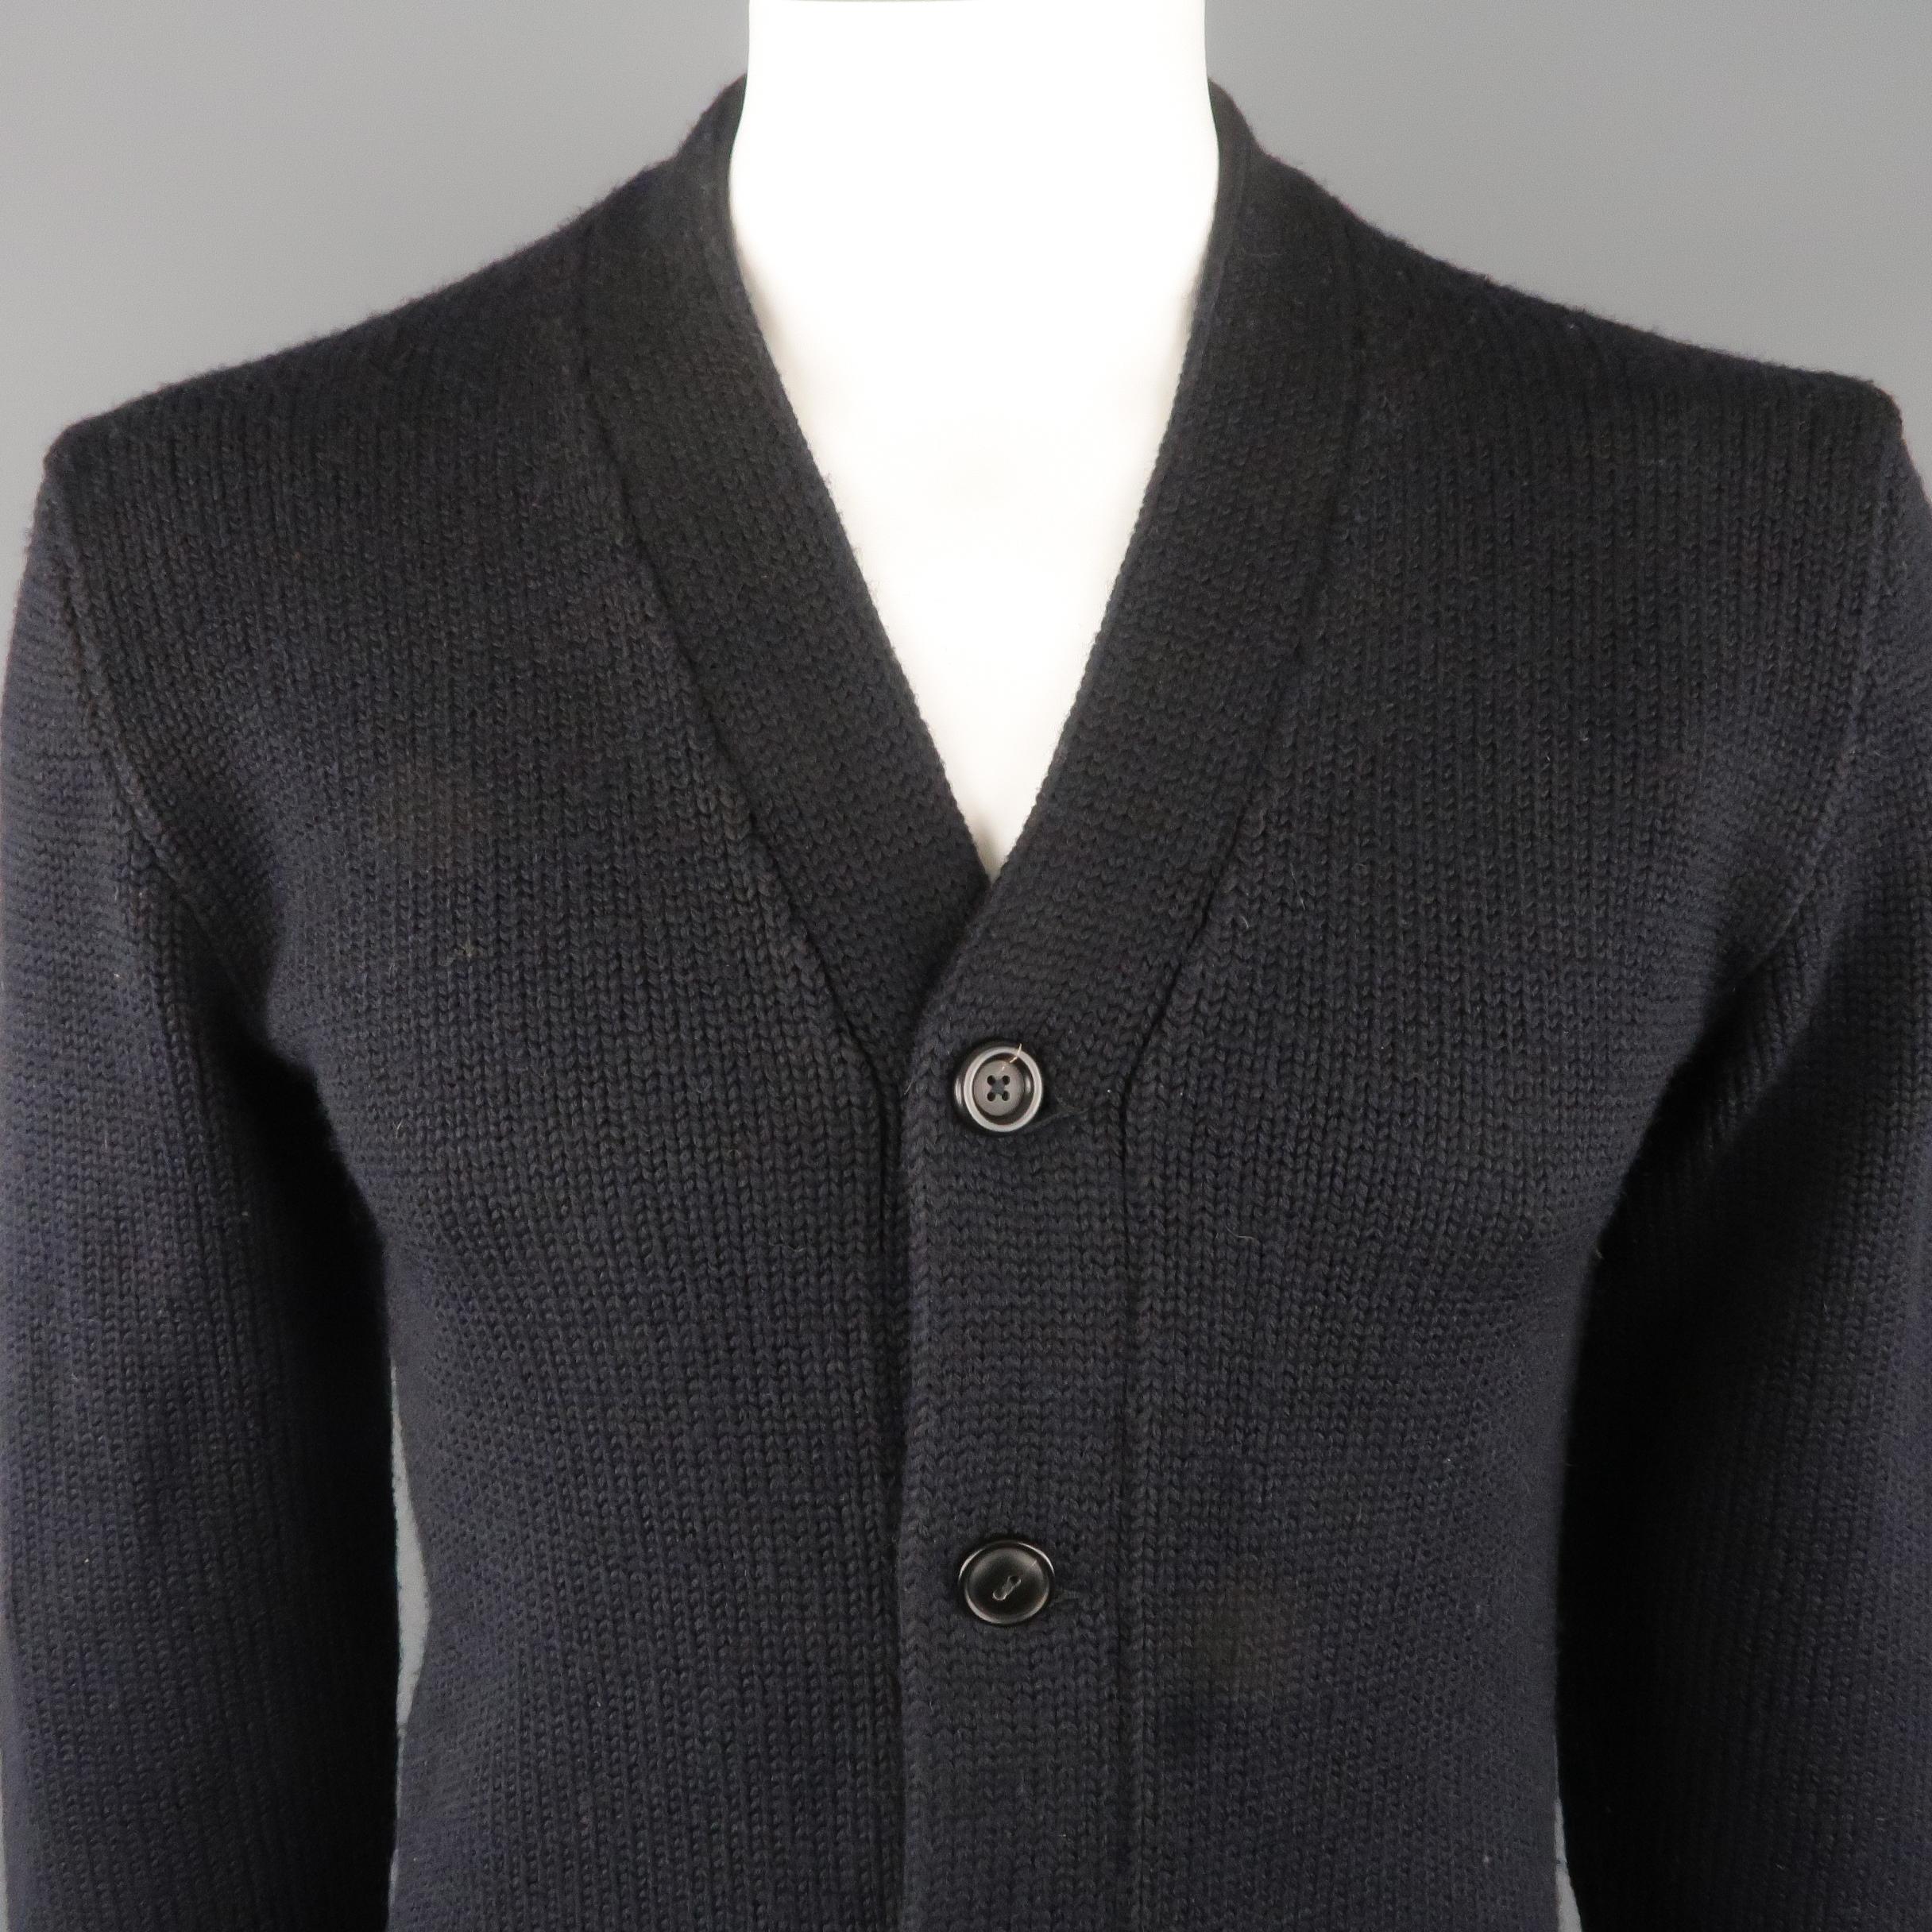 RRL by RALPH LAUREN Cardigan Sweater comes in a navy  tone in a knitted wool  material, with 5 buttons at closure, slit pockets, a front and arm patches, leather elbow patches, and ribbed cuffs and hem.
 
Excellent Pre-Owned Condition.
Marked: M
